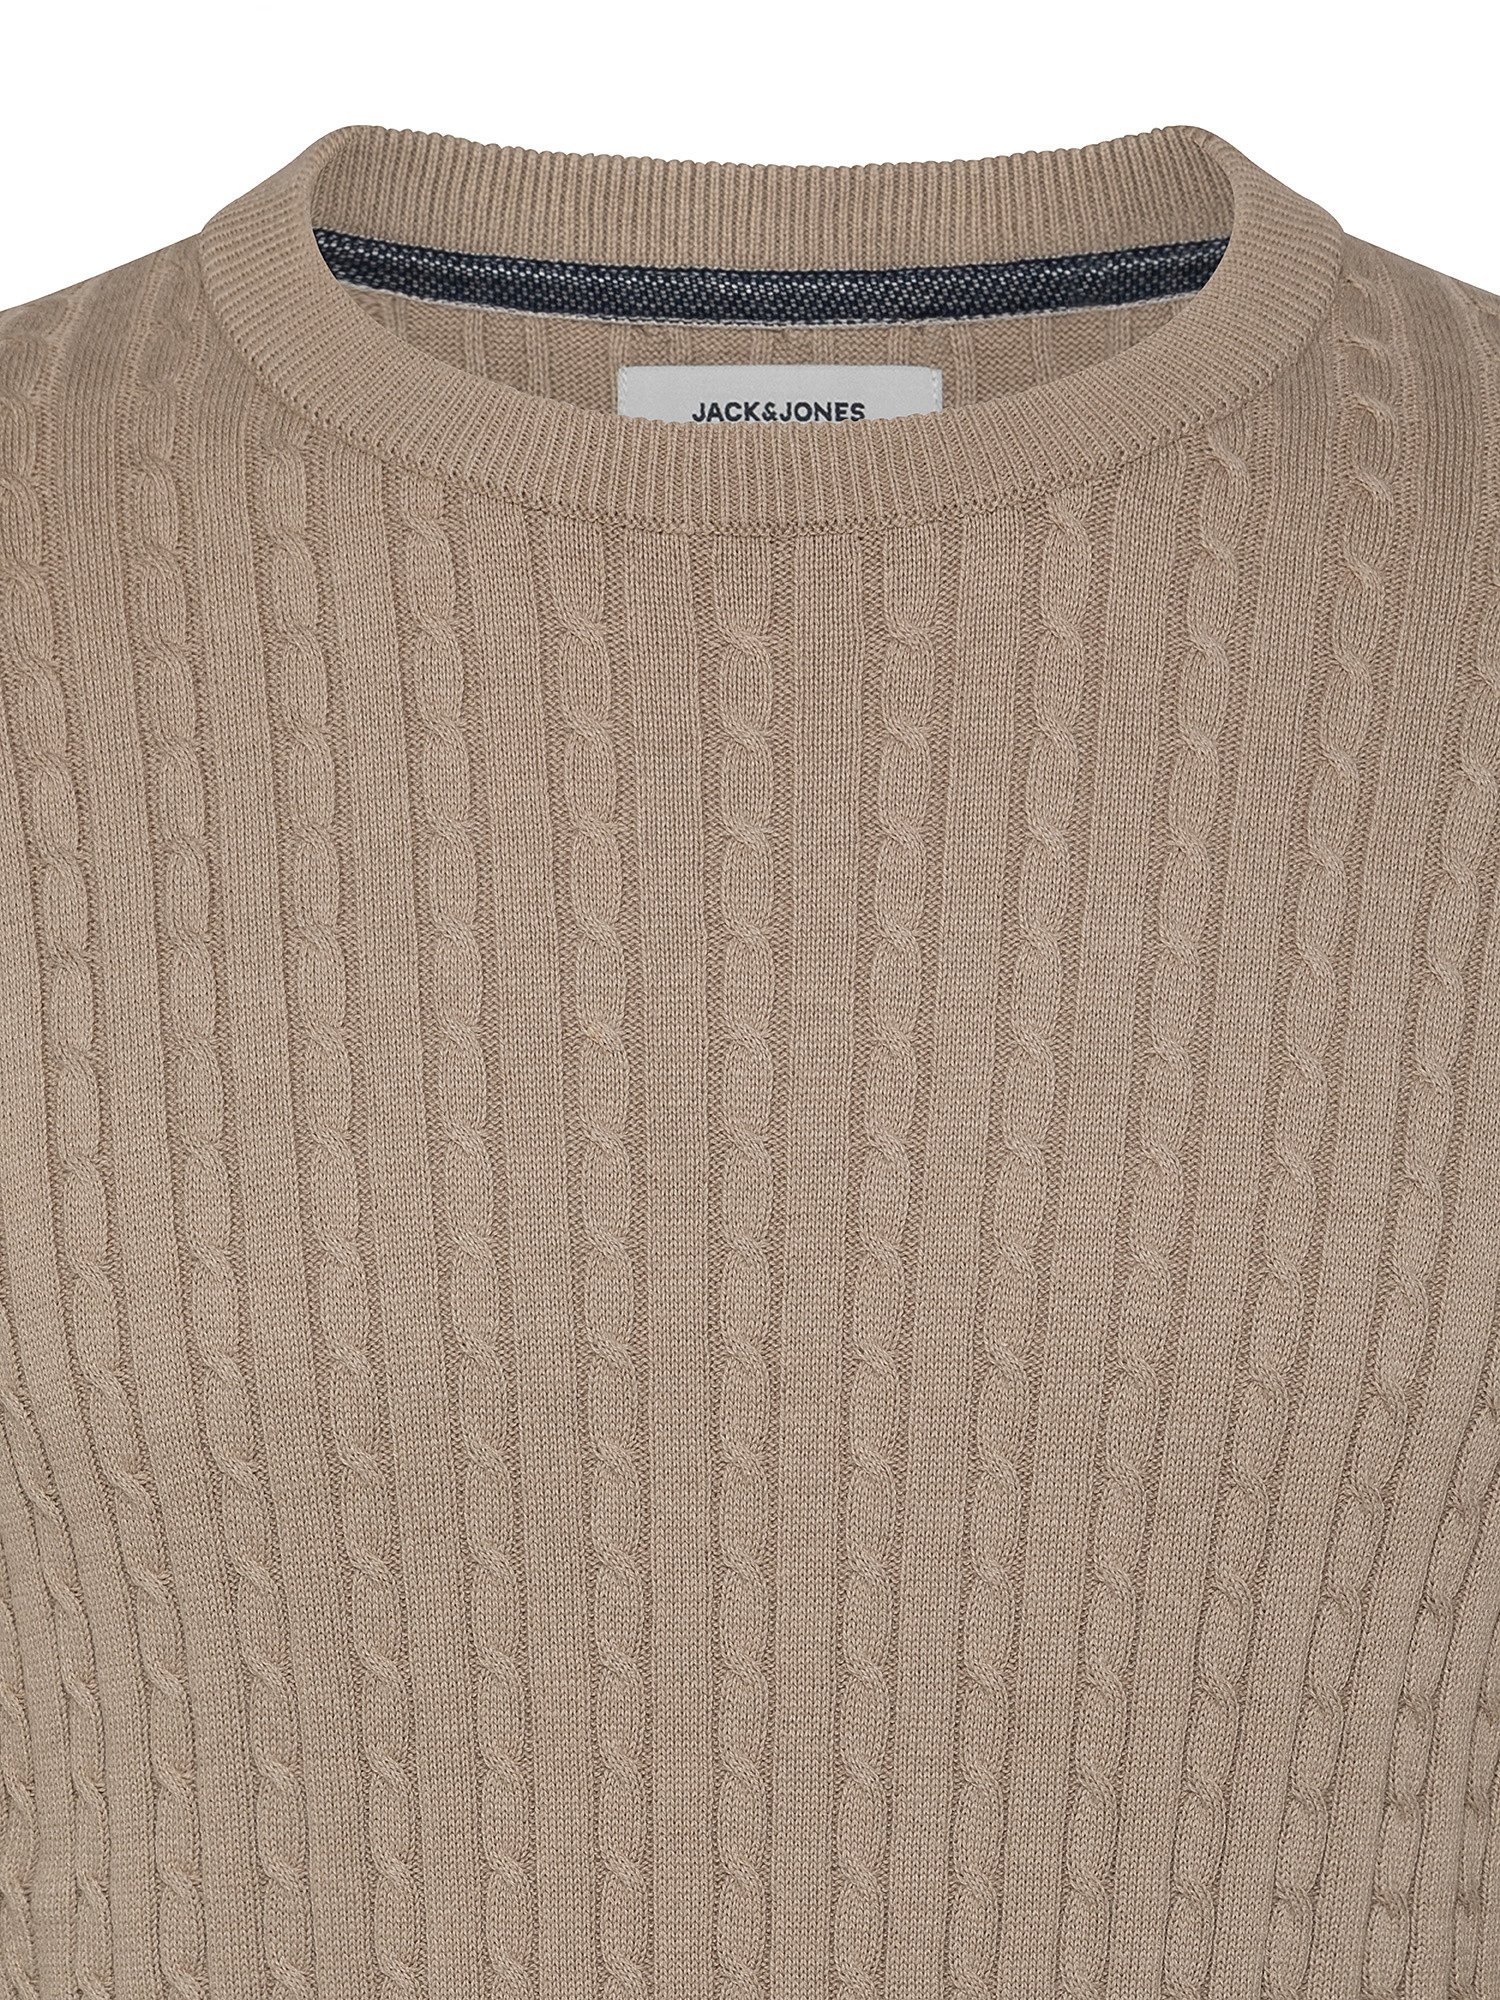 Maglione Girocollo, Beige, large image number 2